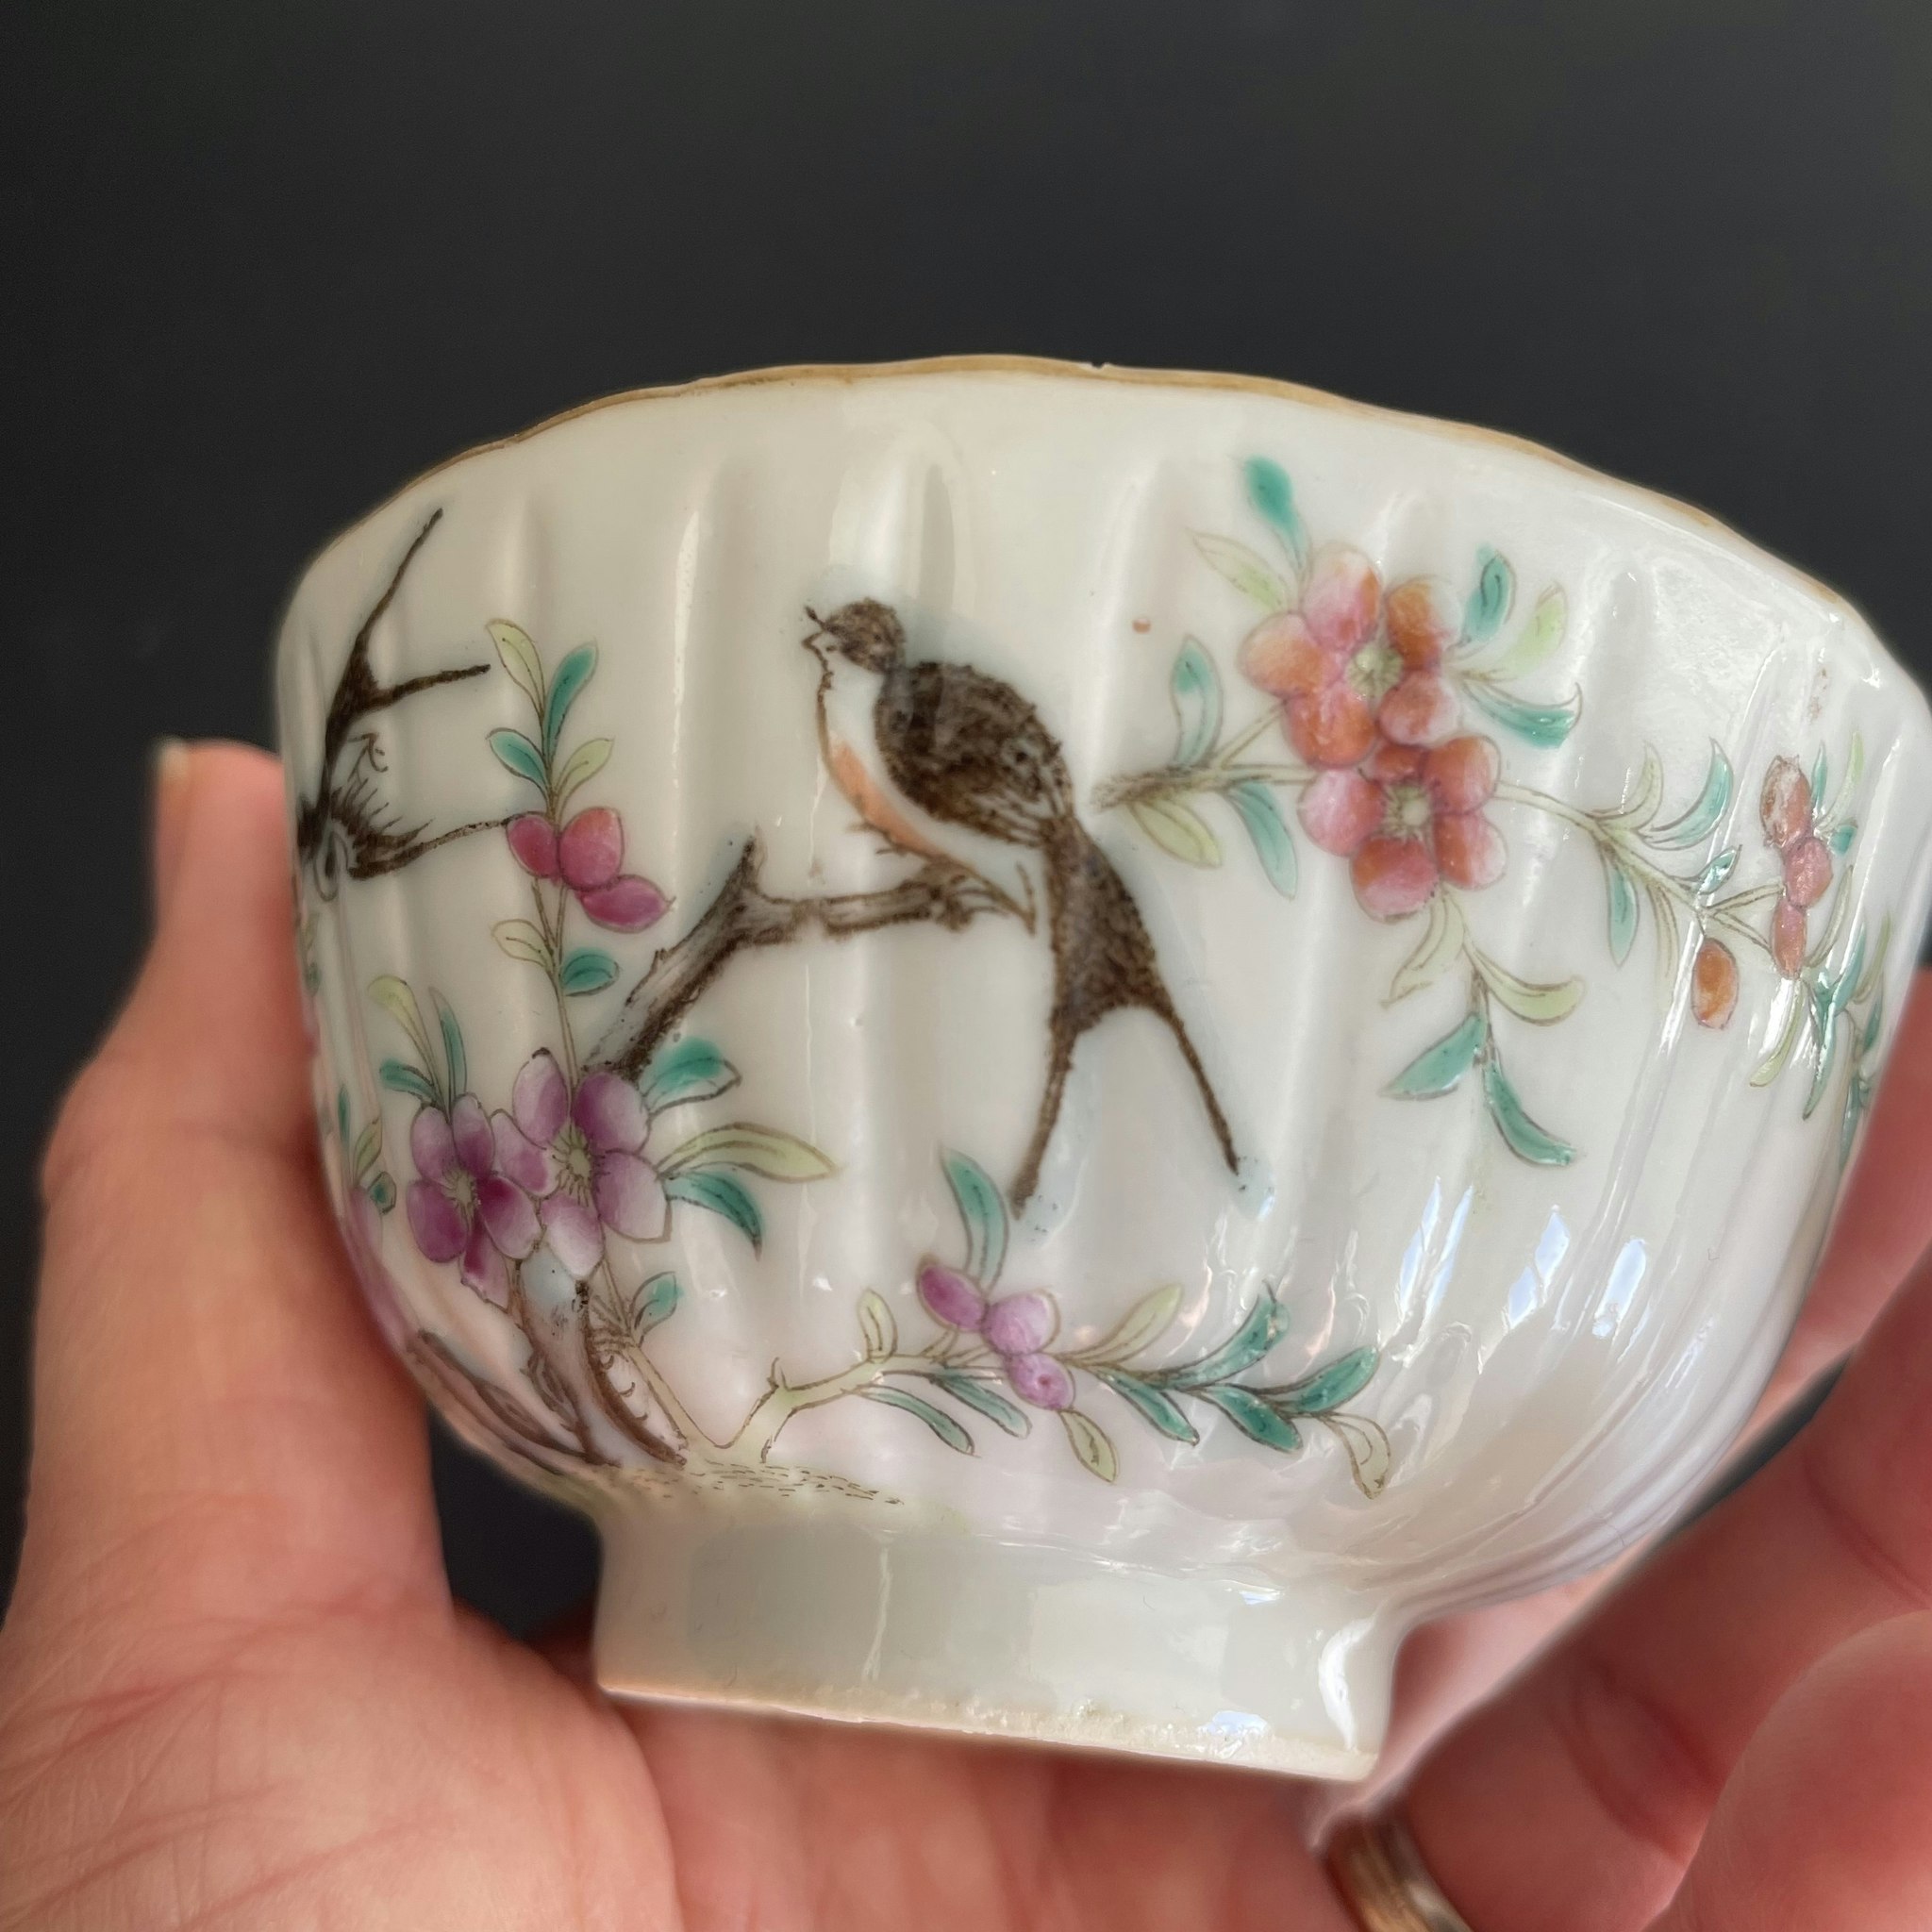 Chinese antique porcelain teacup, Late Qing Dynasty, #1870